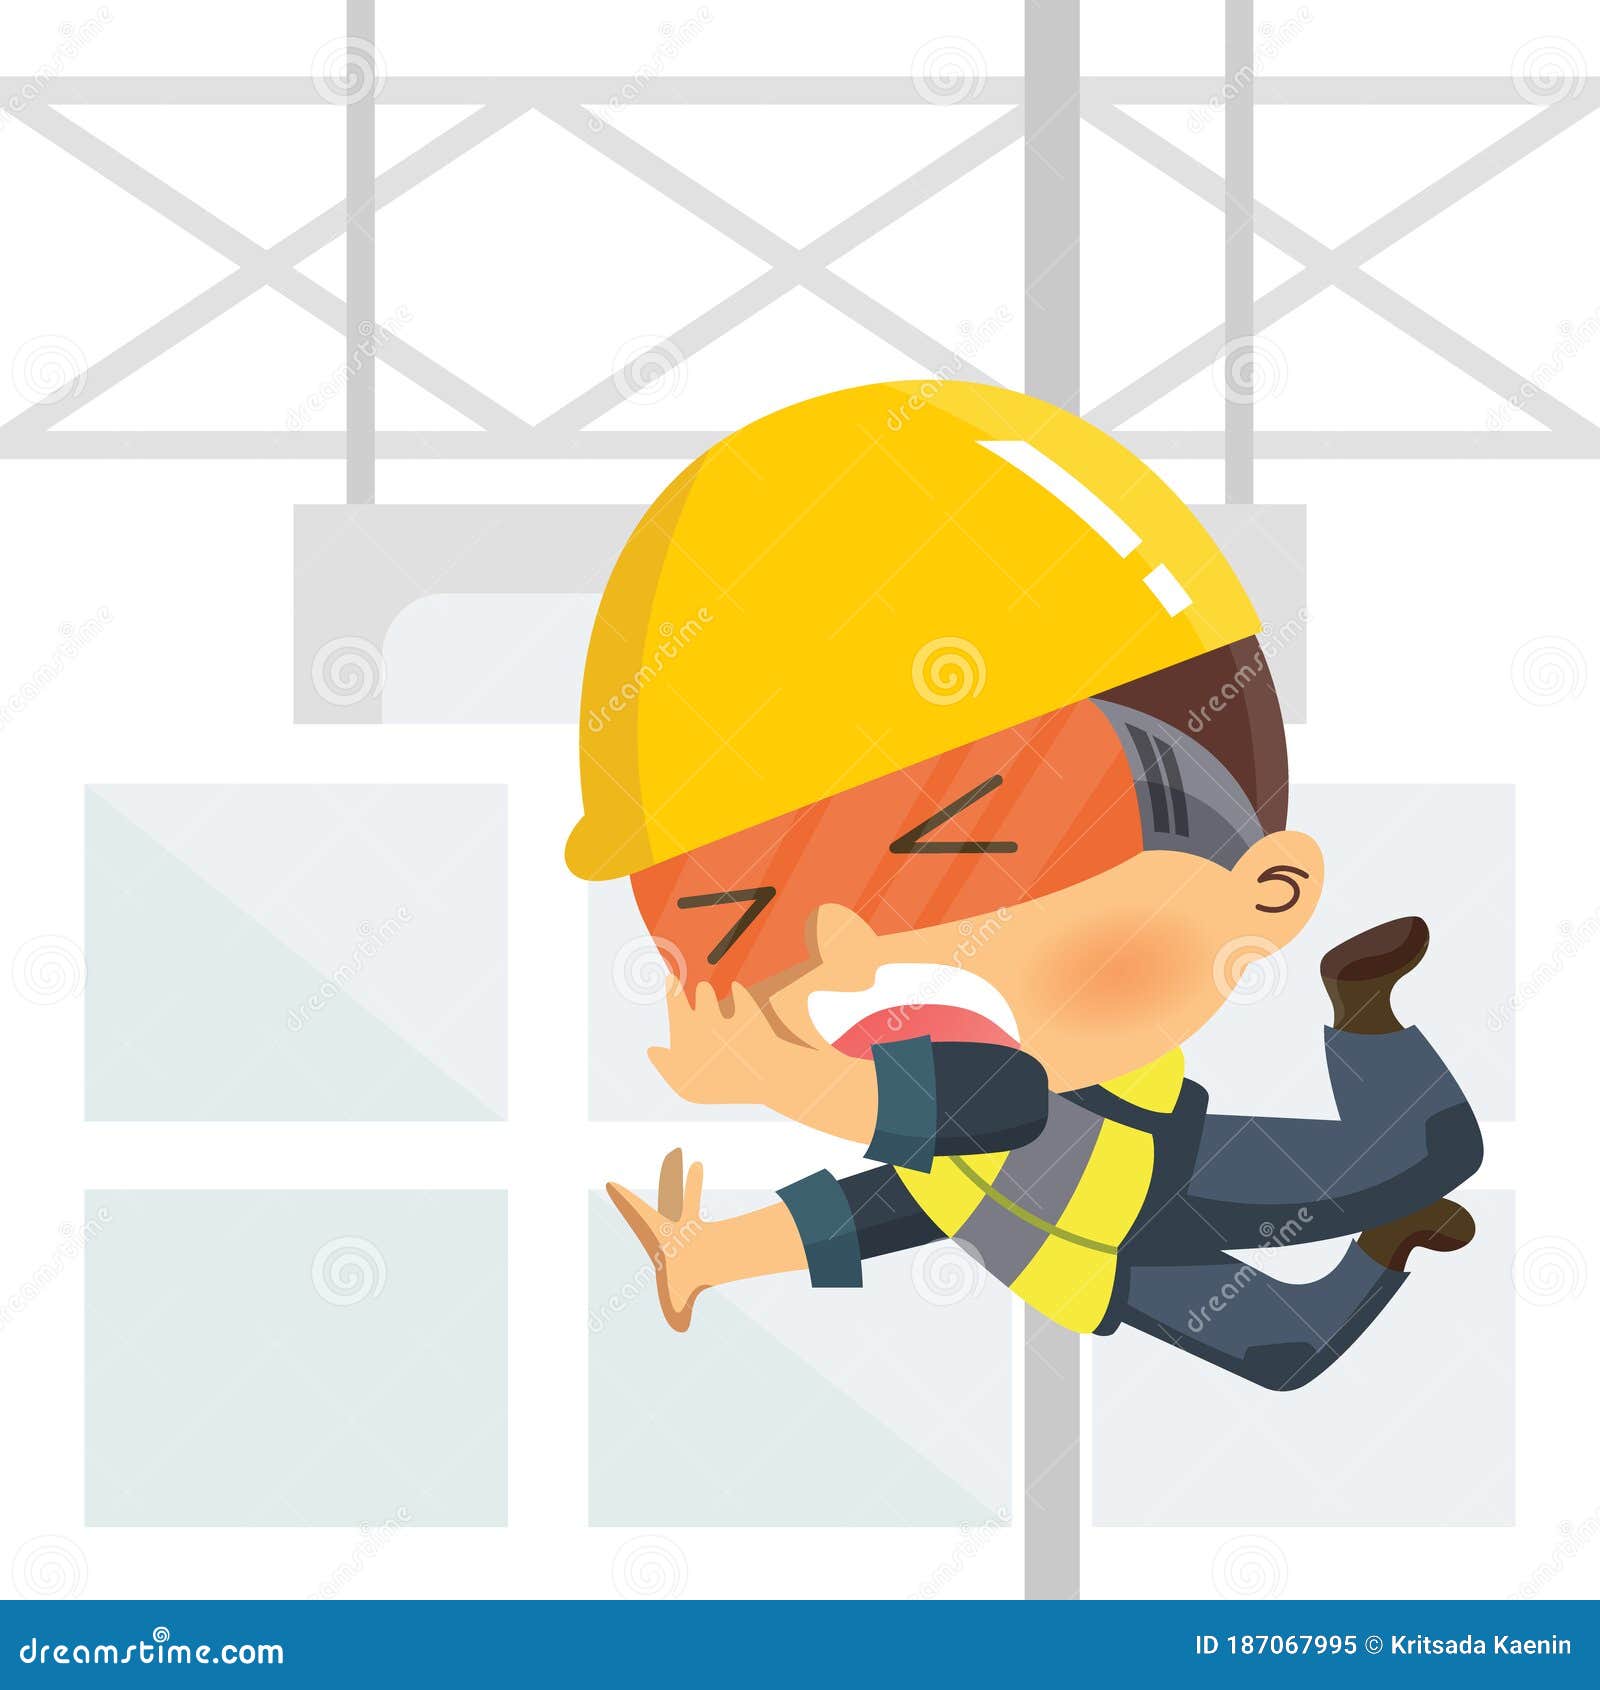 Vector Cartoon Illustration Workplace Safety Stock Illustrations – 1,635  Vector Cartoon Illustration Workplace Safety Stock Illustrations, Vectors &  Clipart - Dreamstime